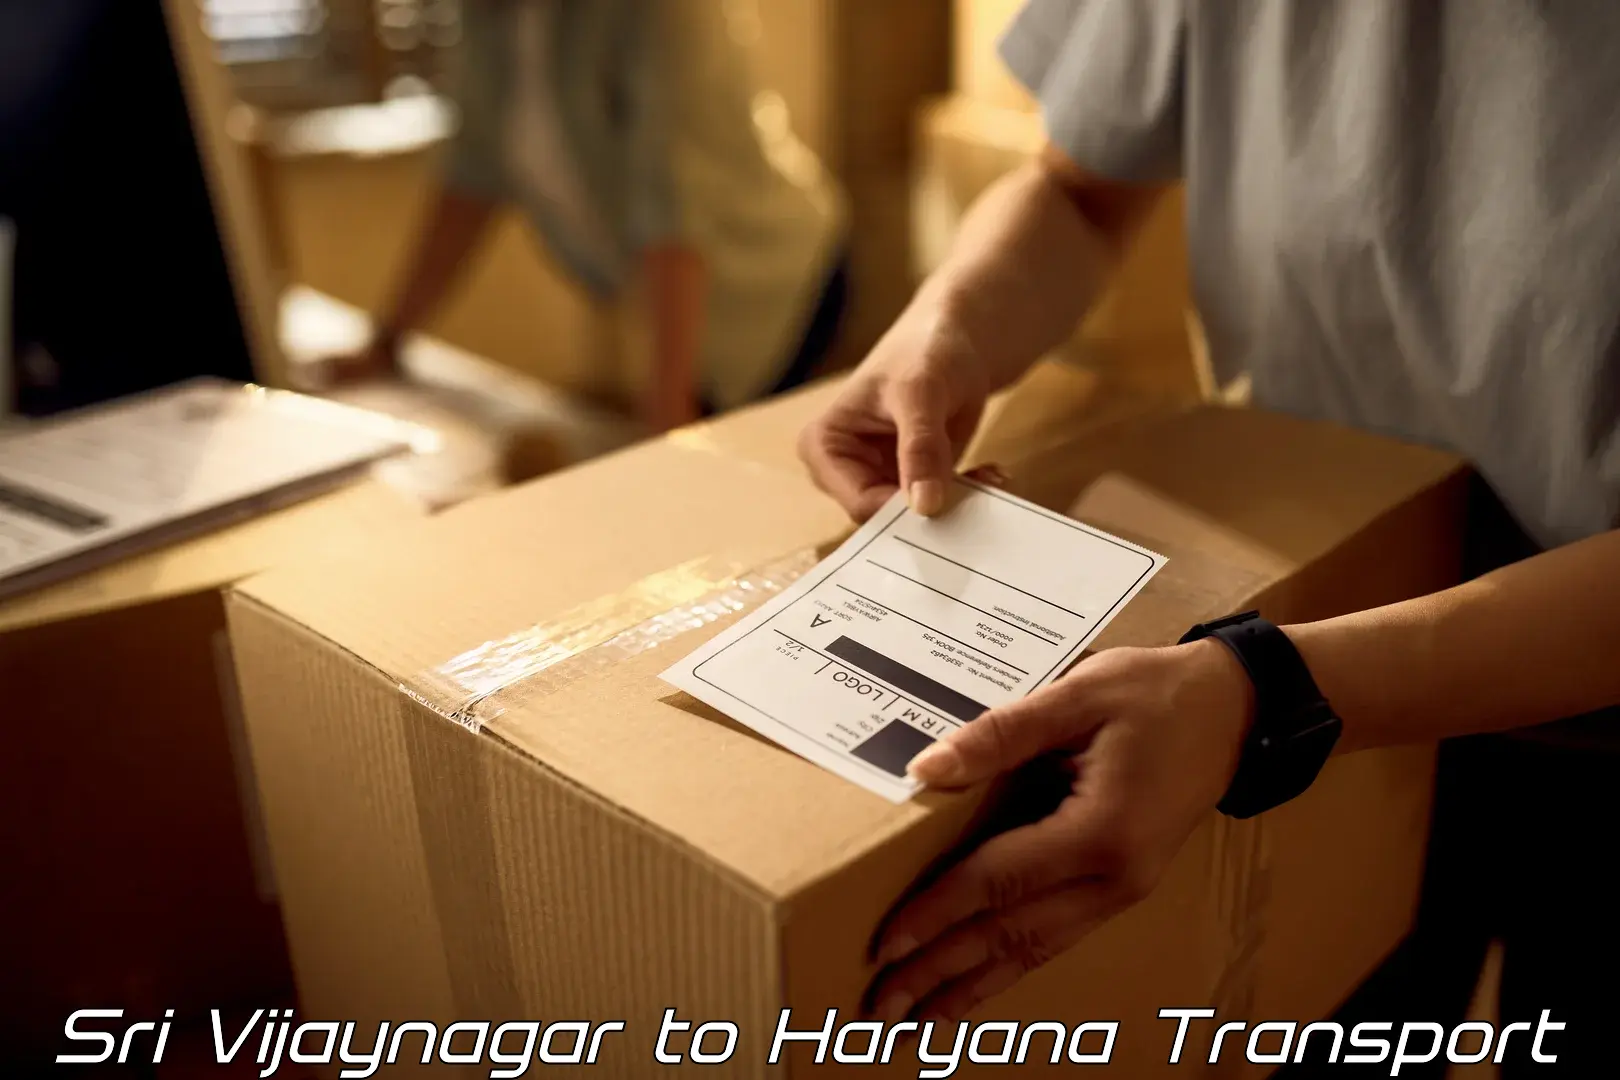 Package delivery services Sri Vijaynagar to Gurgaon